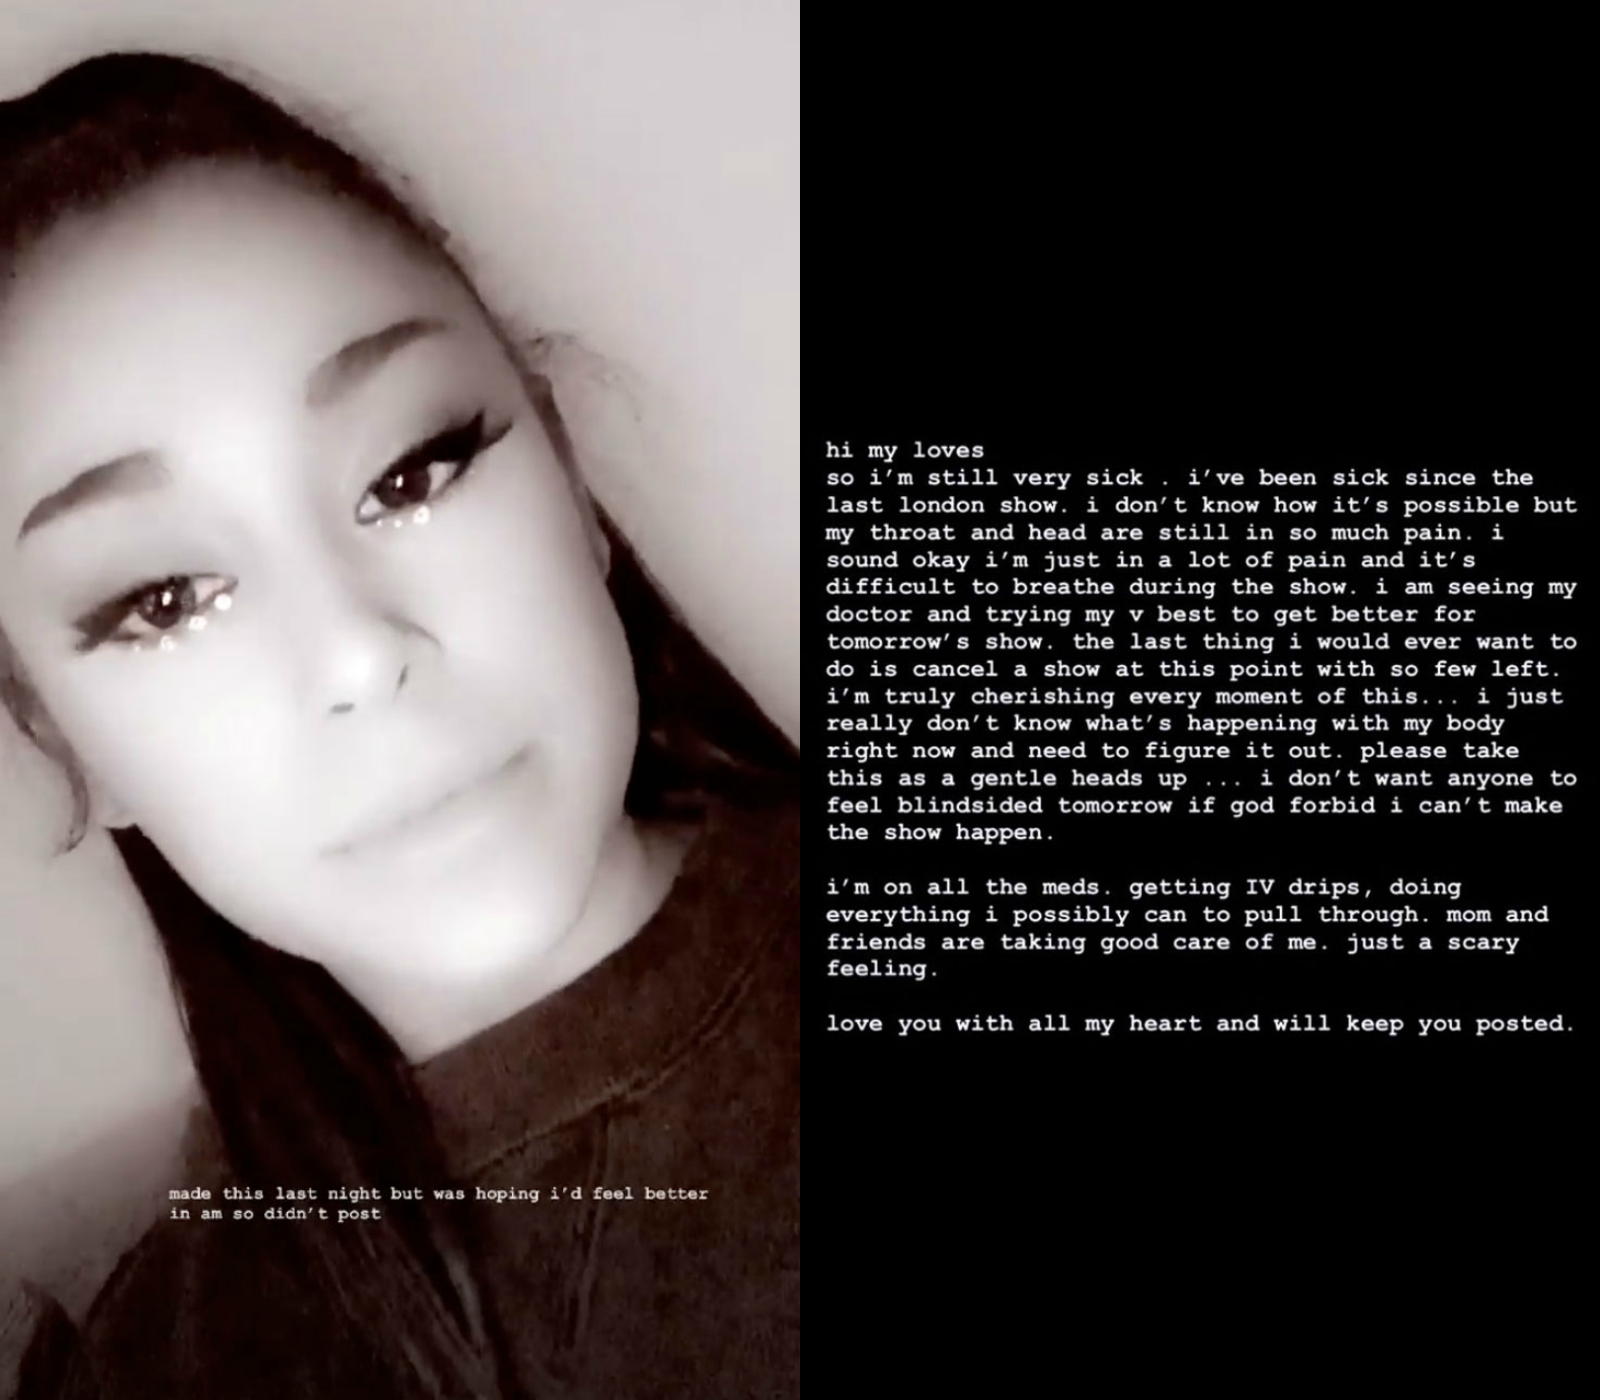 Ariana Grande Blowjob - Ariana Grande Is 'Very Sick' On Tour & Gives A 'Gentle Heads Up' To Fans  About Potential Cancellation! - CelebrityTalker.com